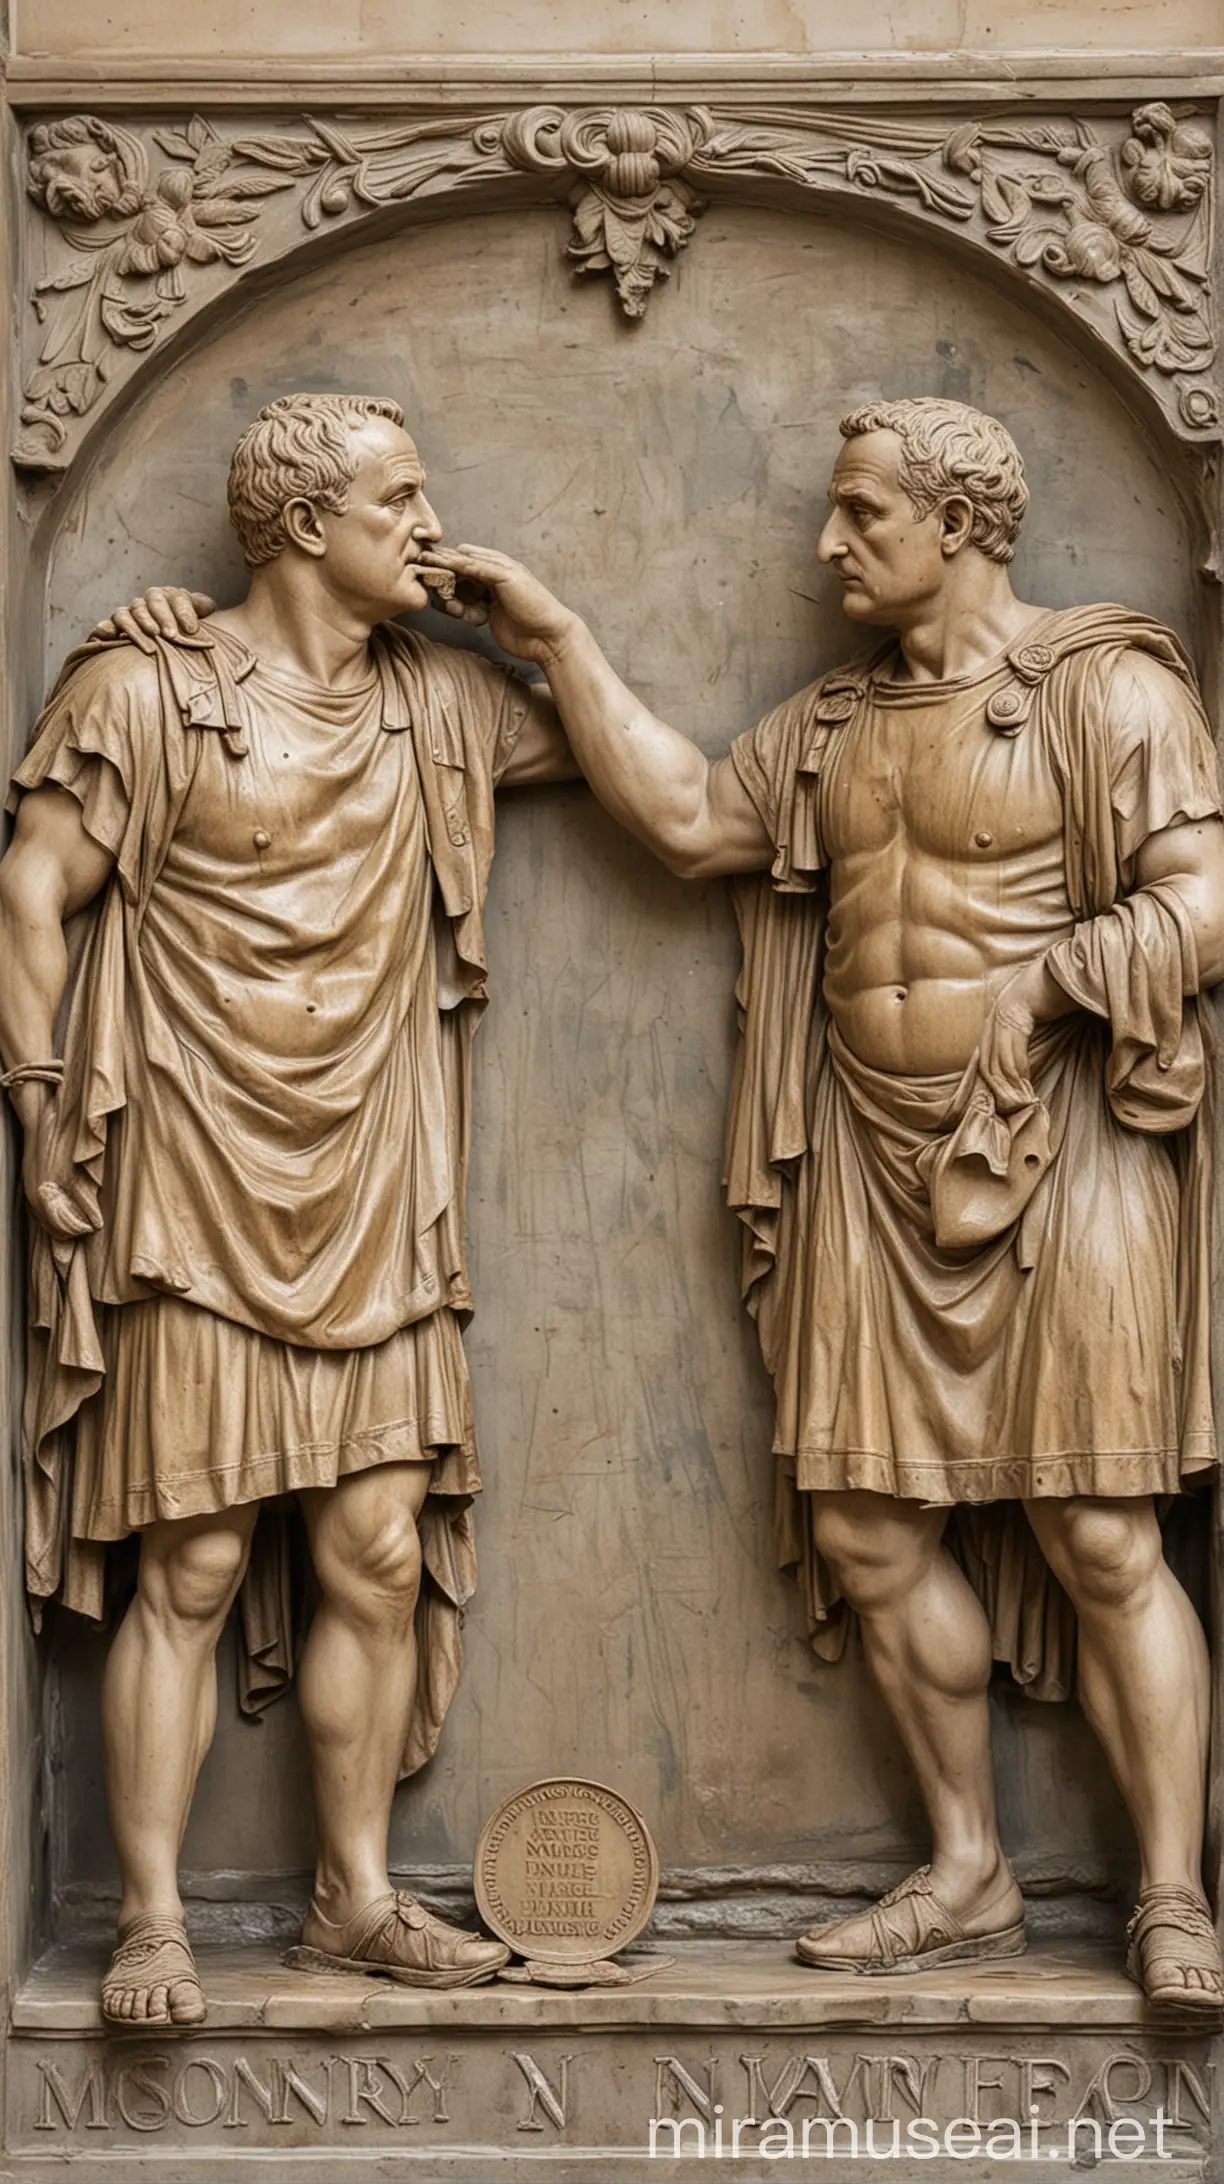 Vespasian Confronts Son Over Urinal Tax Money Doesnt Smell